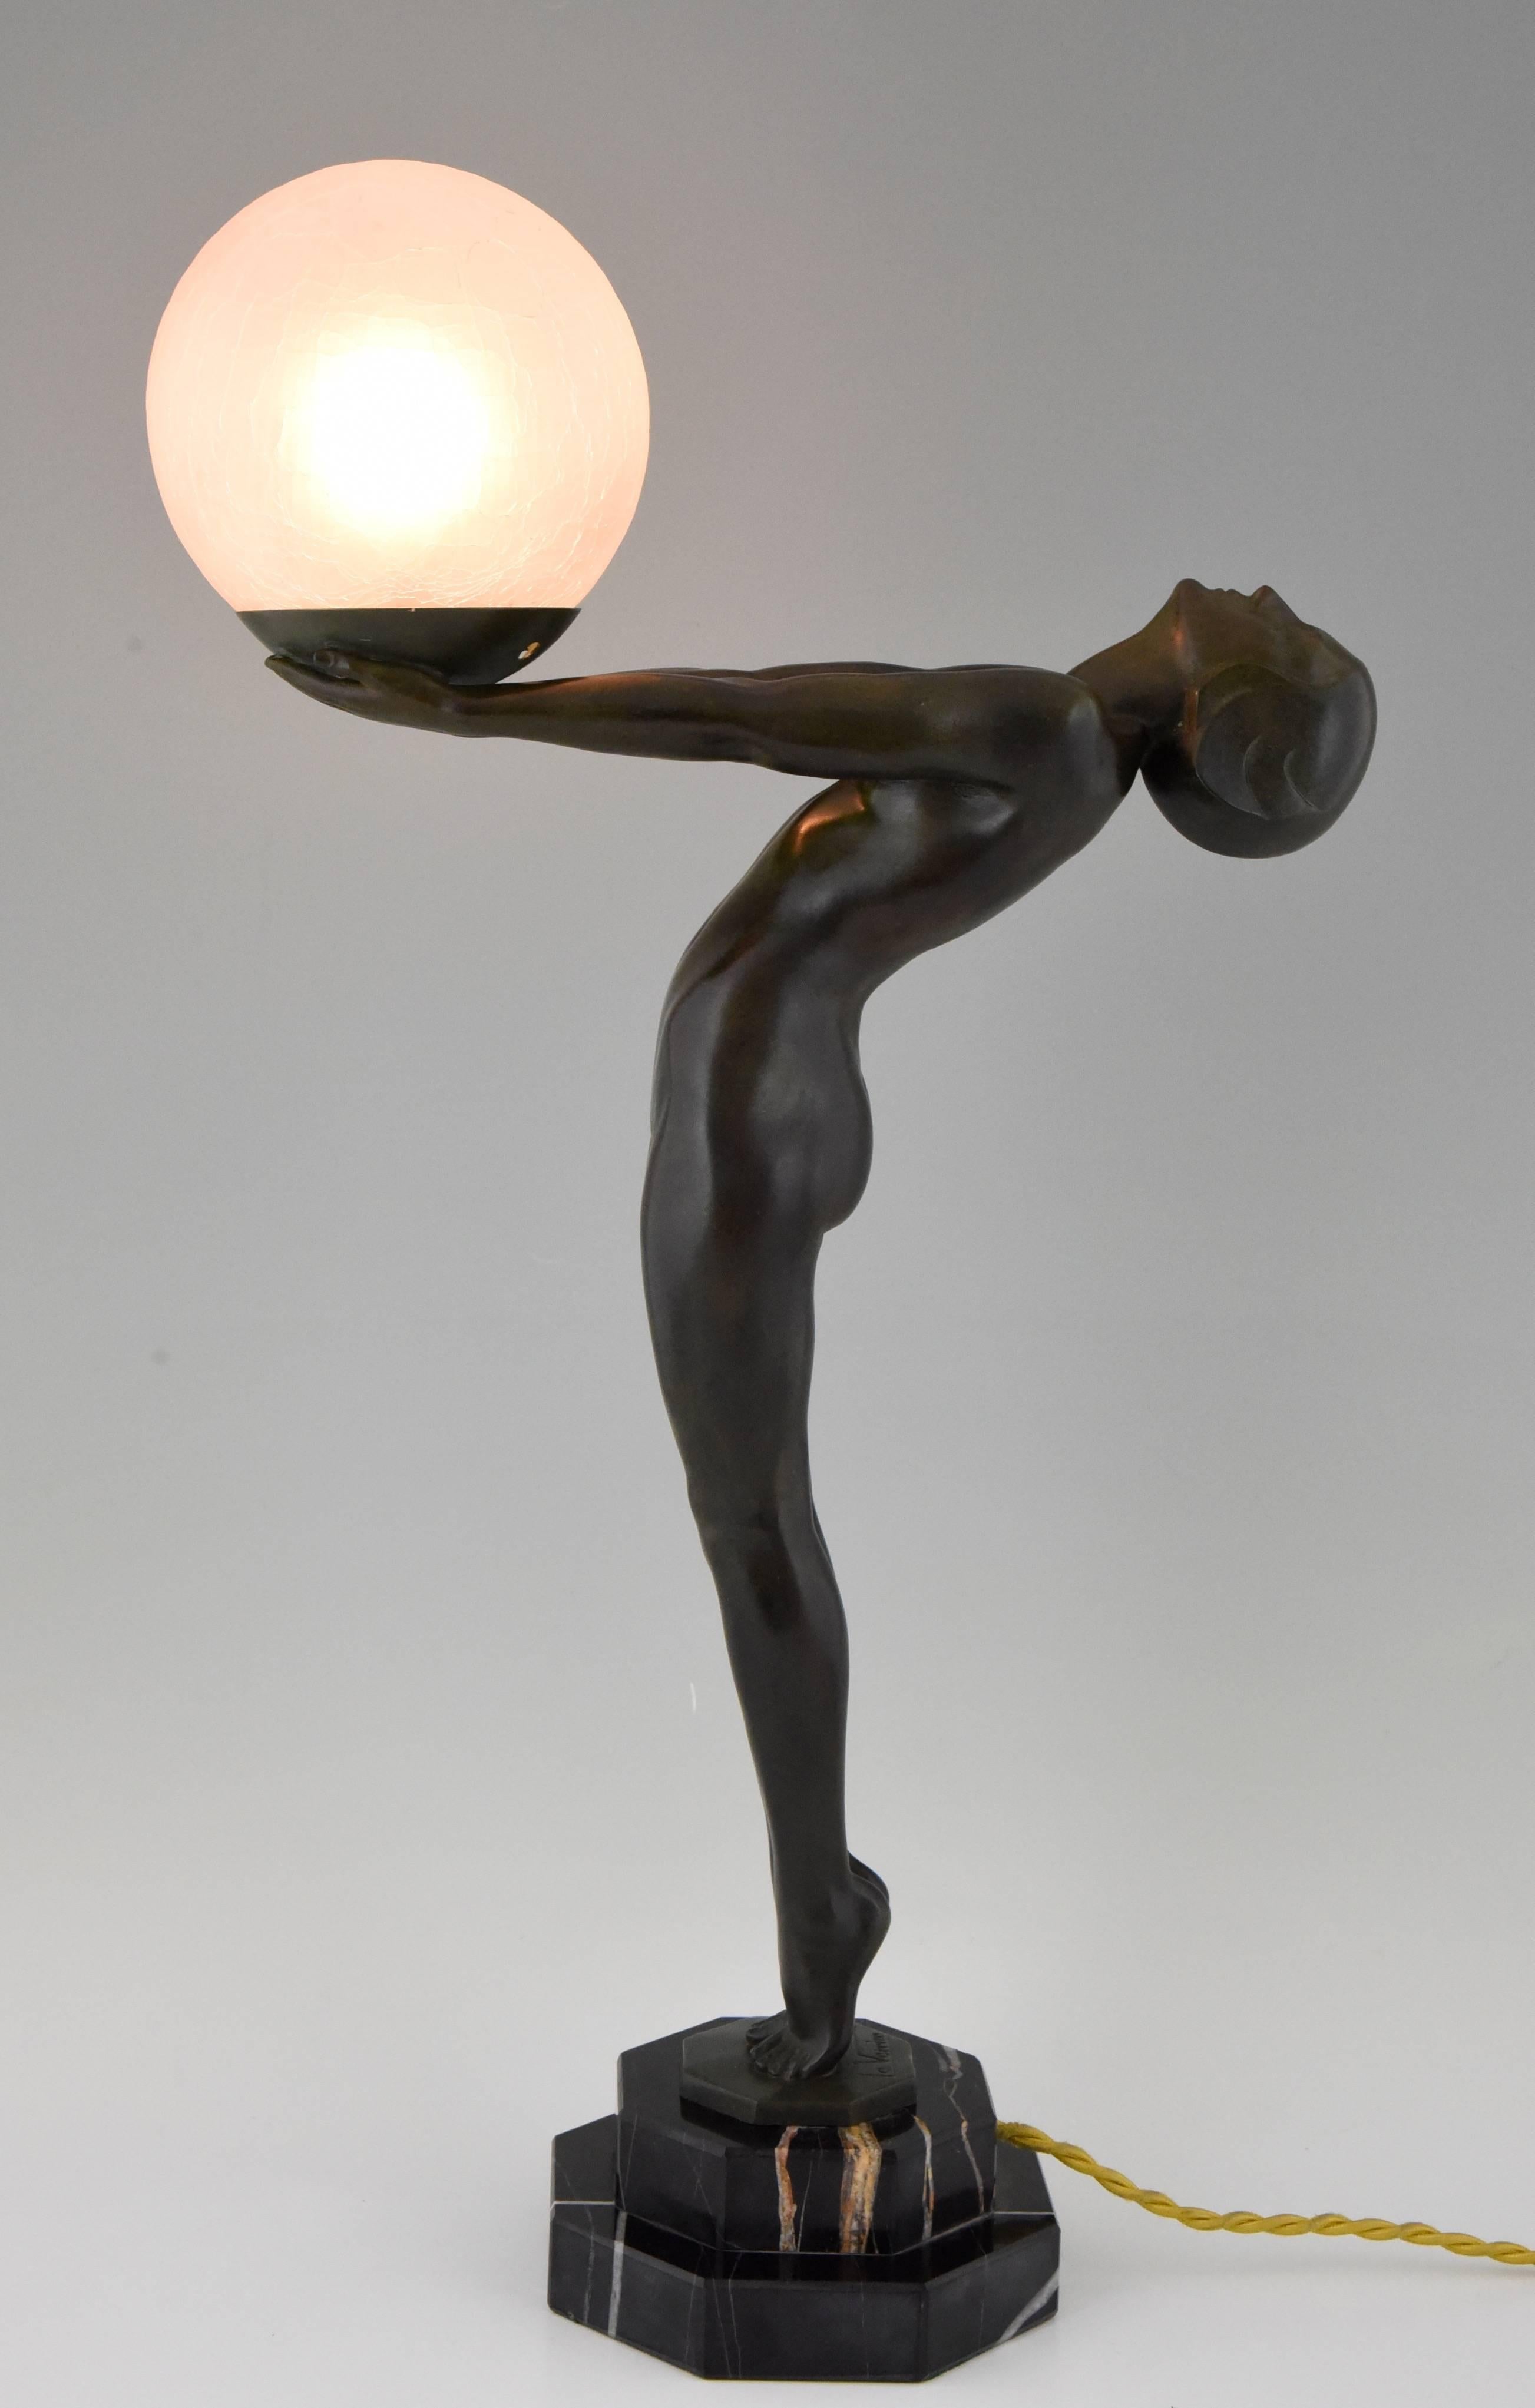 Stylish Art Deco lamp in the shape of a nude standing on her toes holding a ball. 
Artist/ Maker: Max Le Verrier.
Signature/ Marks: Le Verrier.
Style: Art Deco.
Date: 1930.
Material: Green patinated metal, marble base, crackle glass.
Origin: